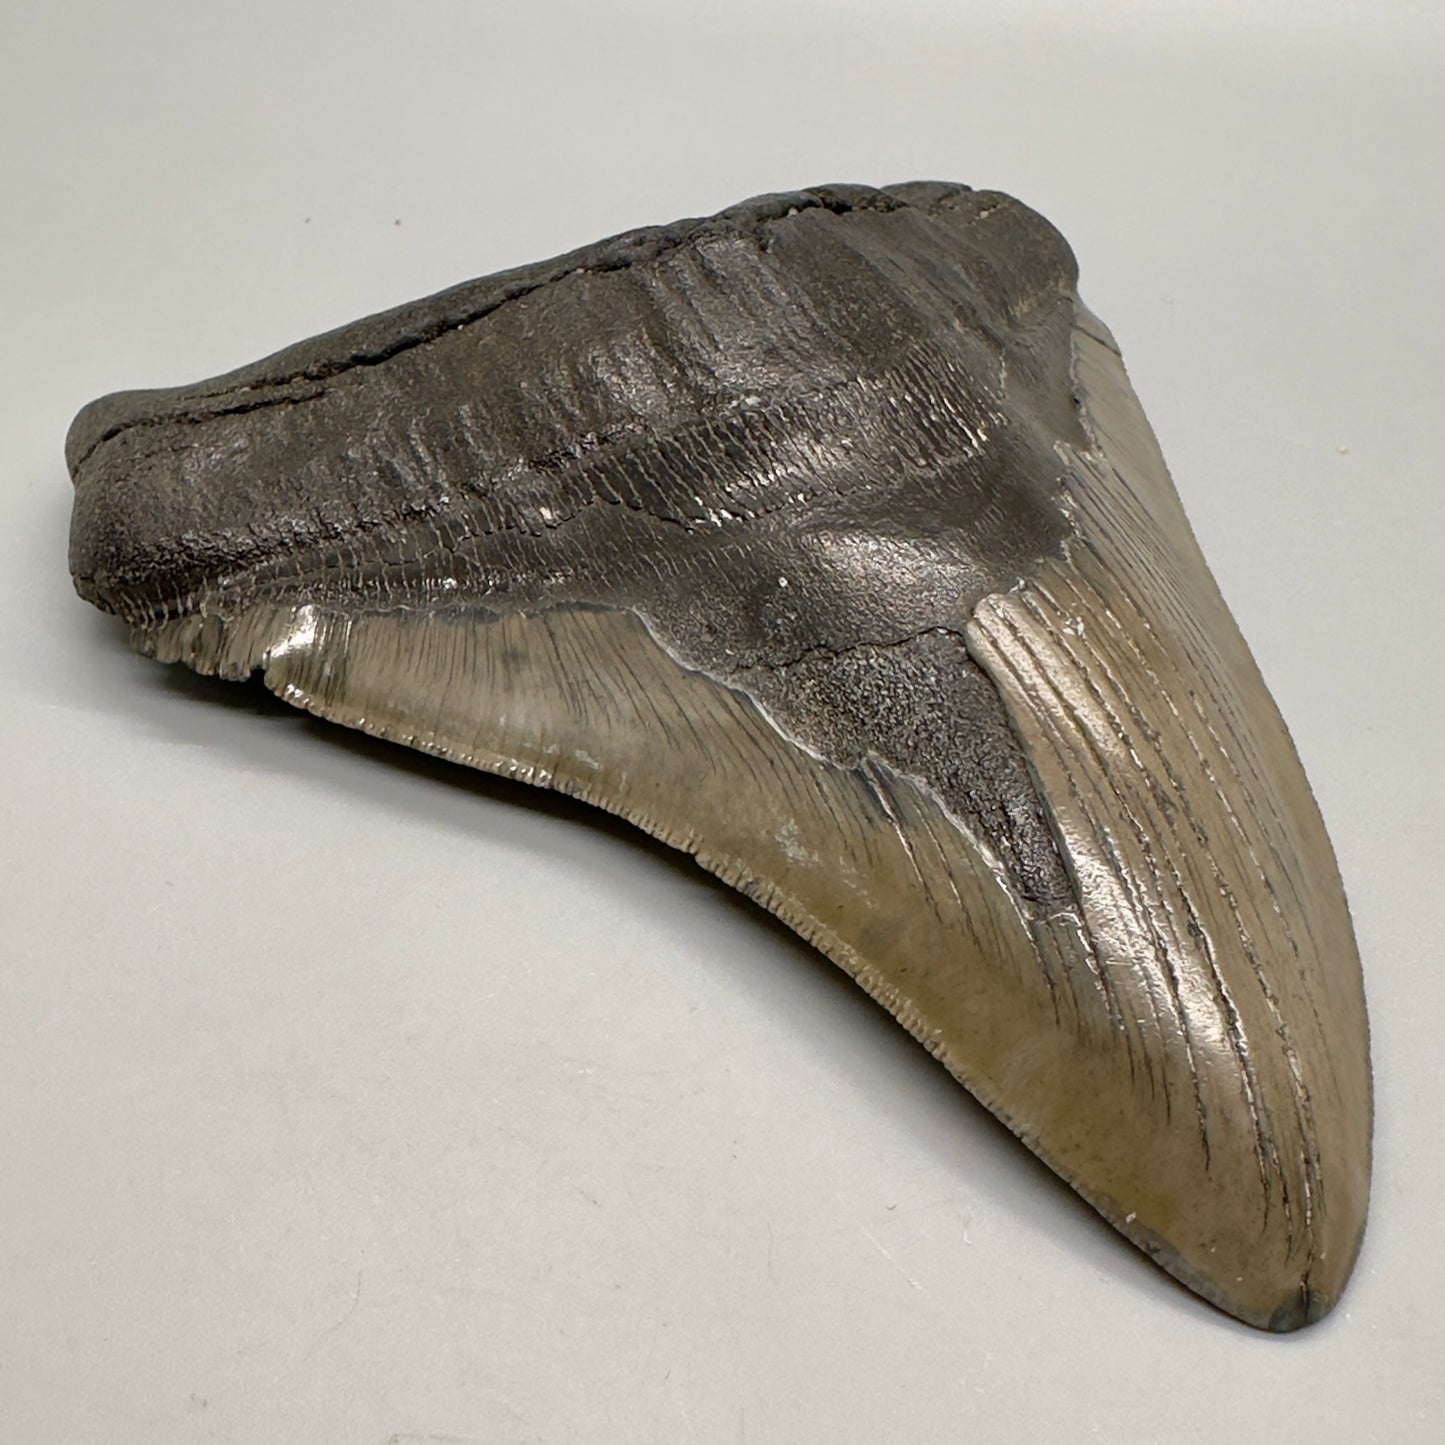 EXTRA LARGE 6.05" Fossil Megalodon Tooth: Scuba Diving Discovery from Southeast USA CM4606 - Front left